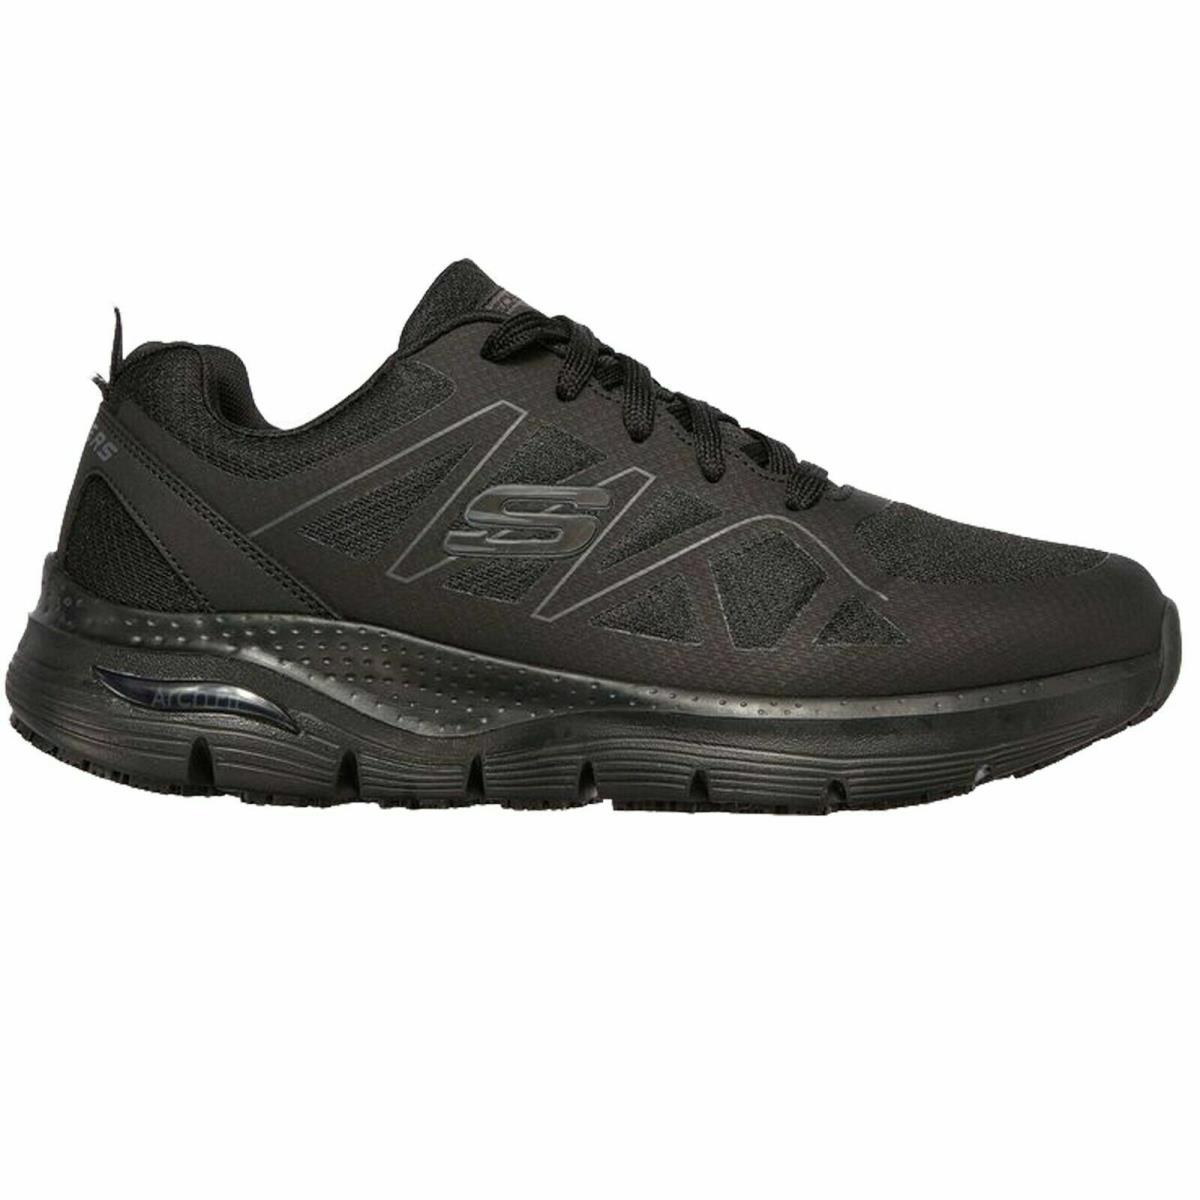 Men`s Skechers 200025/BLK Arch Fit Slip Res Axtell Soft Toe Black Work Shoes